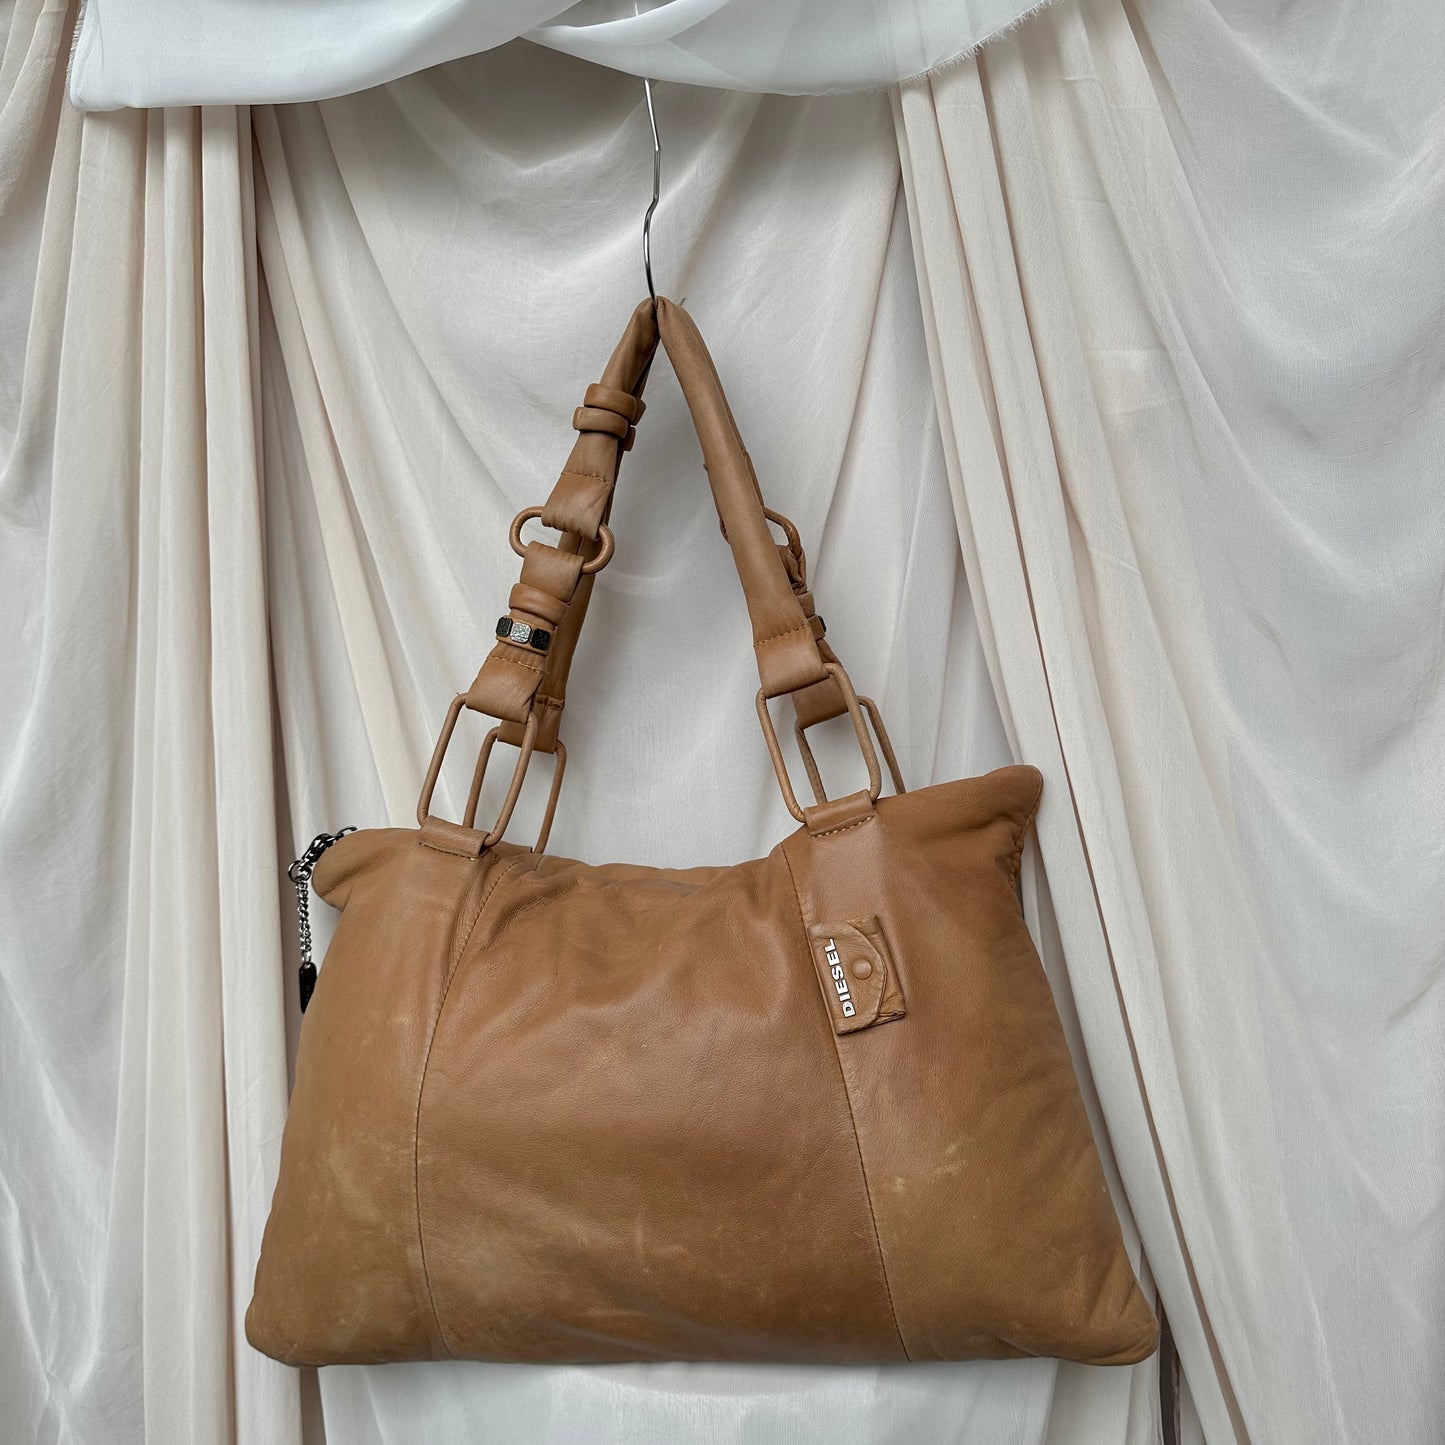 LEATHER PADDED PILLOW BAG IN TAN by Diesel